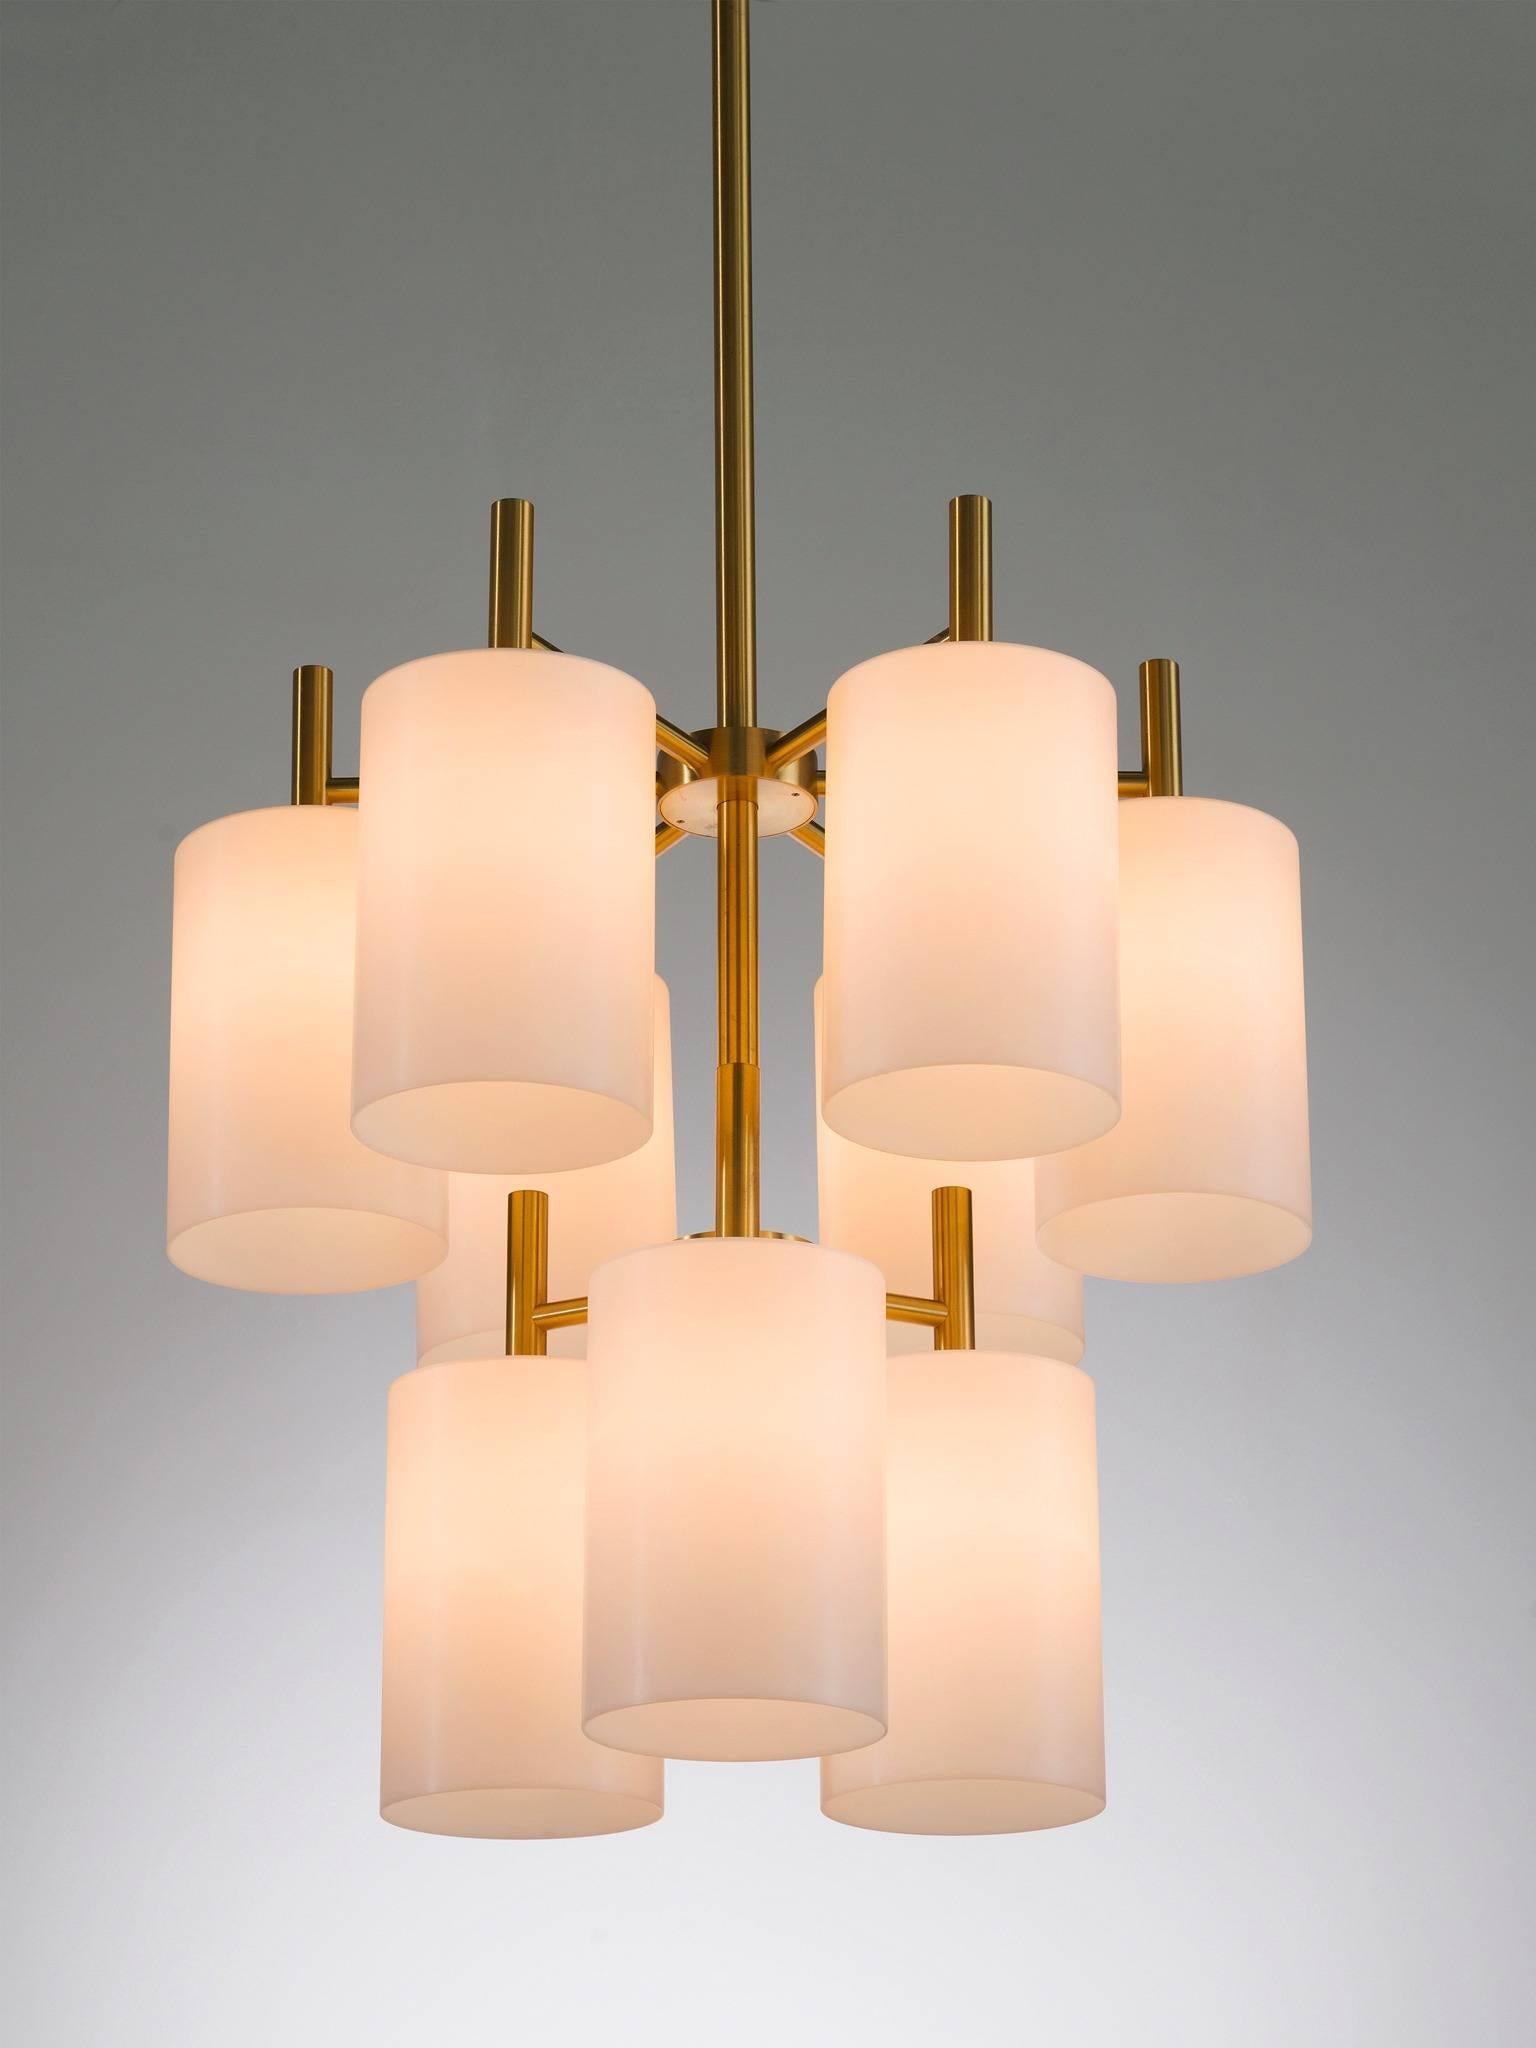 Pendants with nine cylindric white Lucite and brass, Luxus, Sweden, 1960s.

This chandelier is made of brass and the tall stem with nine branches that all end with a downwards facing cone. The symmetry and geometric form of make this a very stately